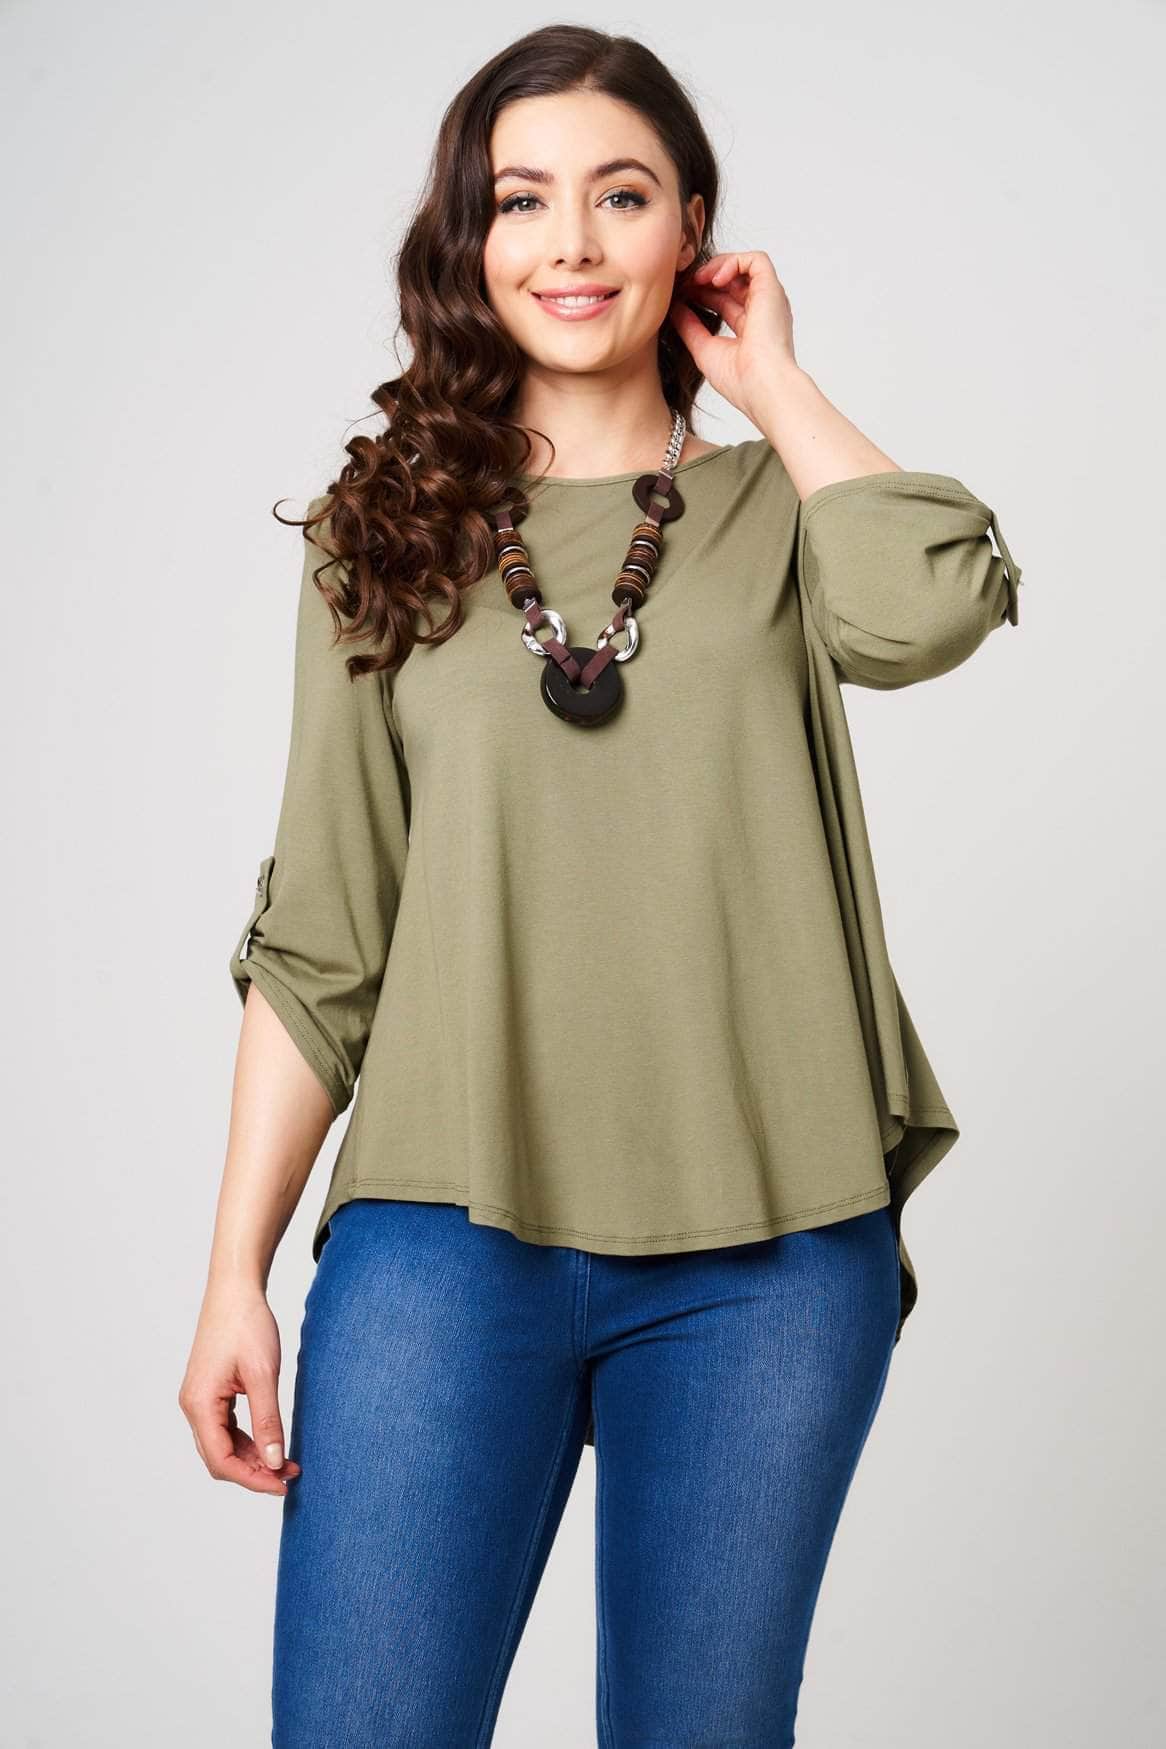 Saloos Top Khaki / 12 Essential Loose Top with Necklace